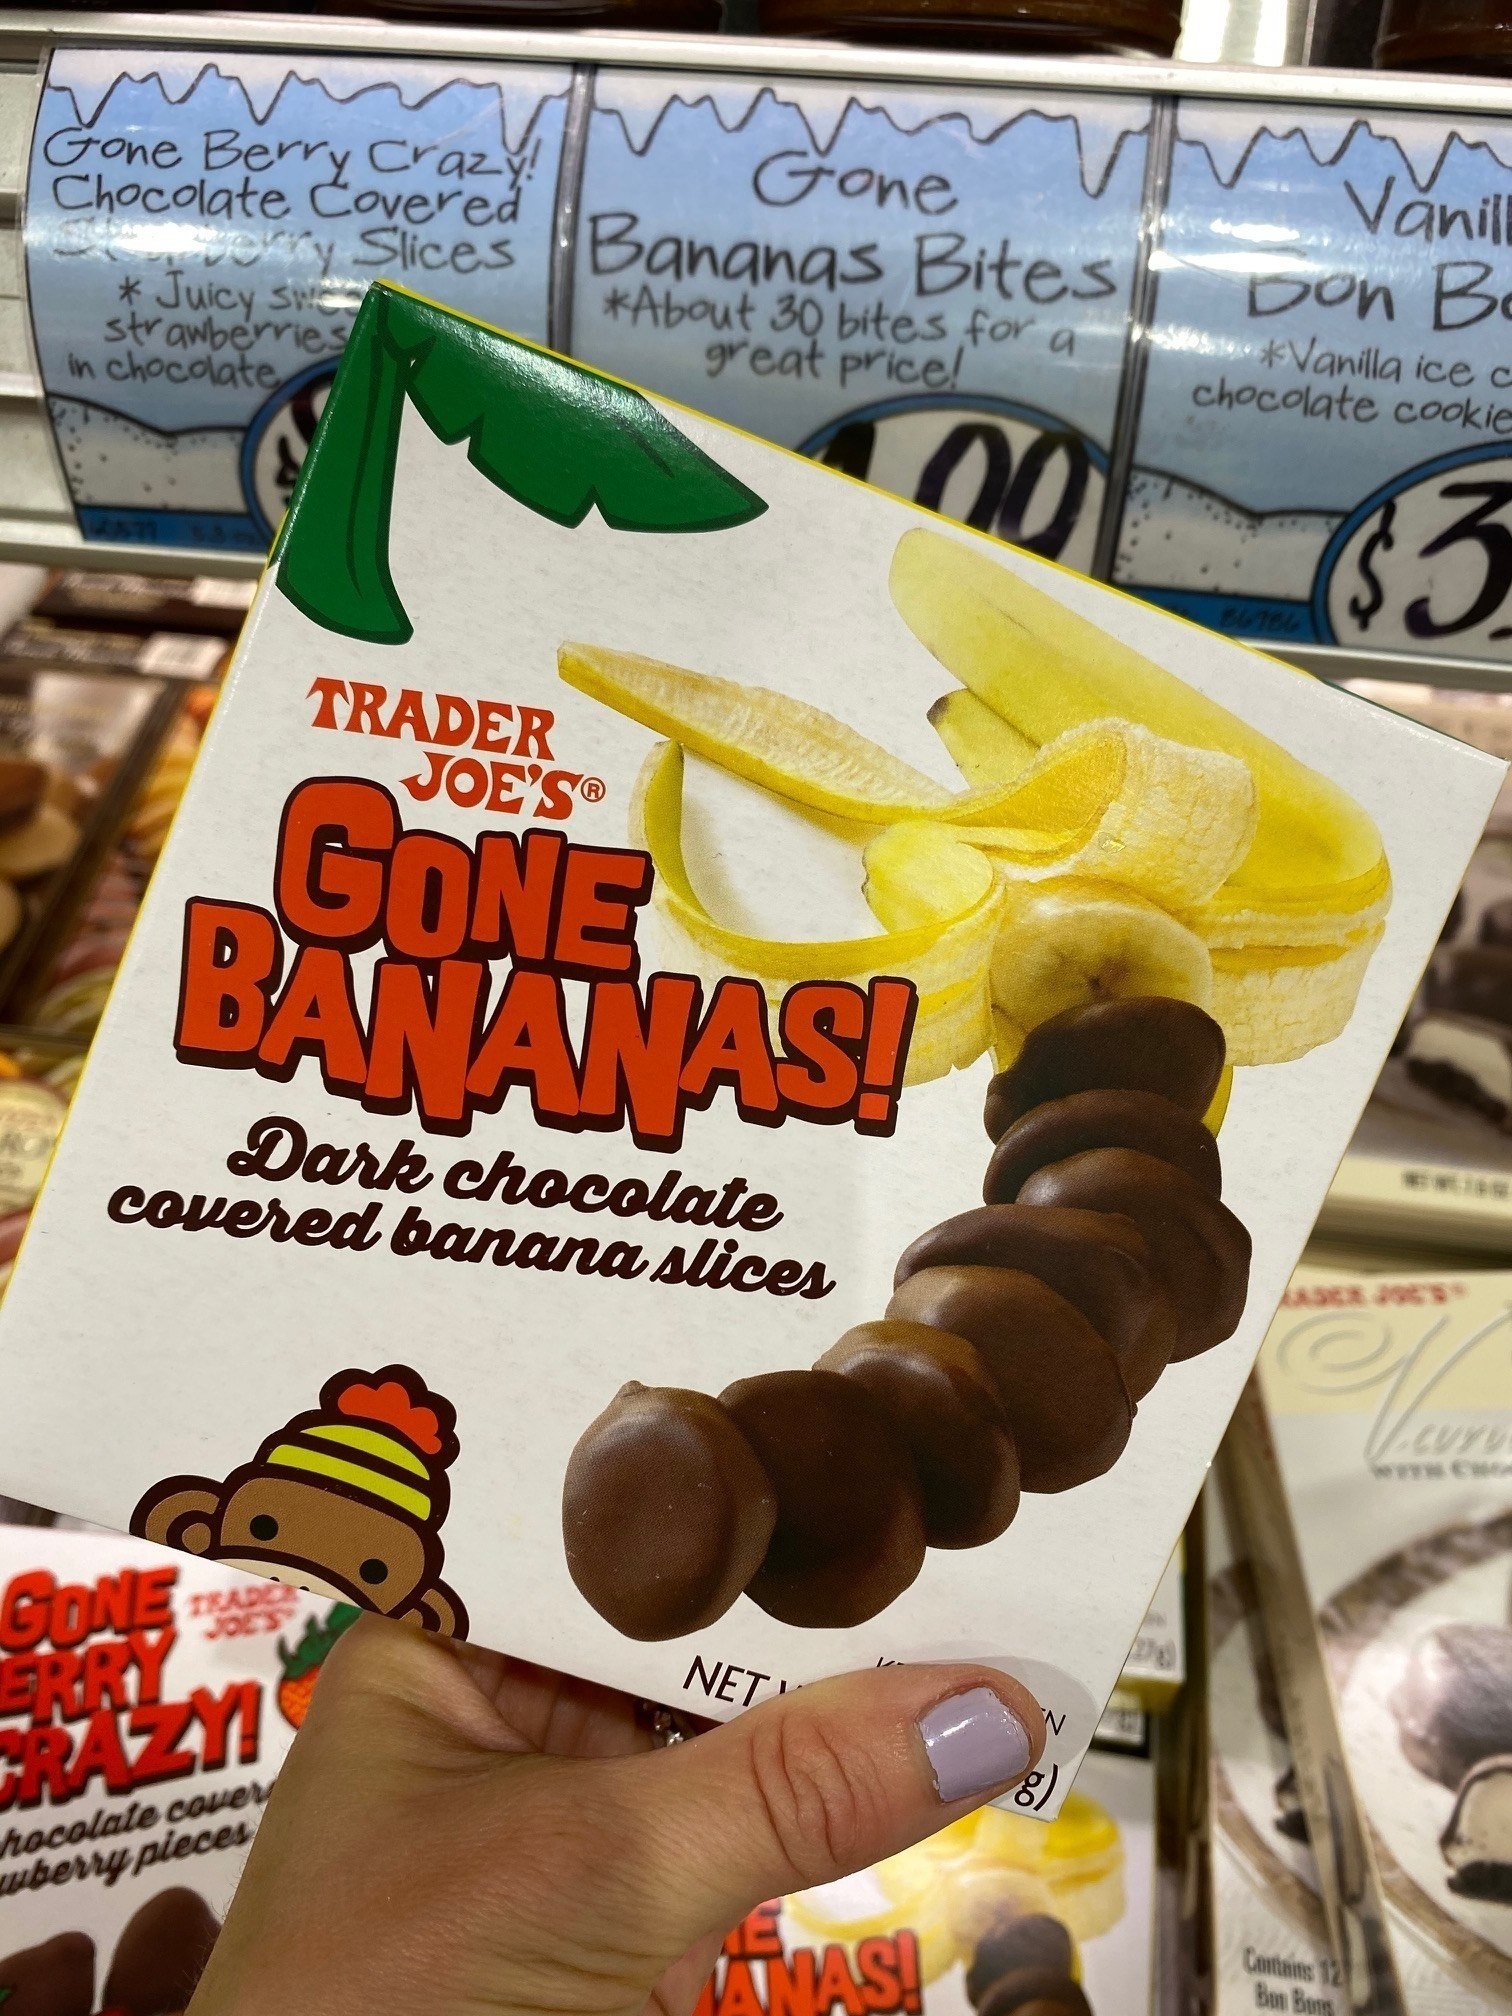 A box of Gone Bananas